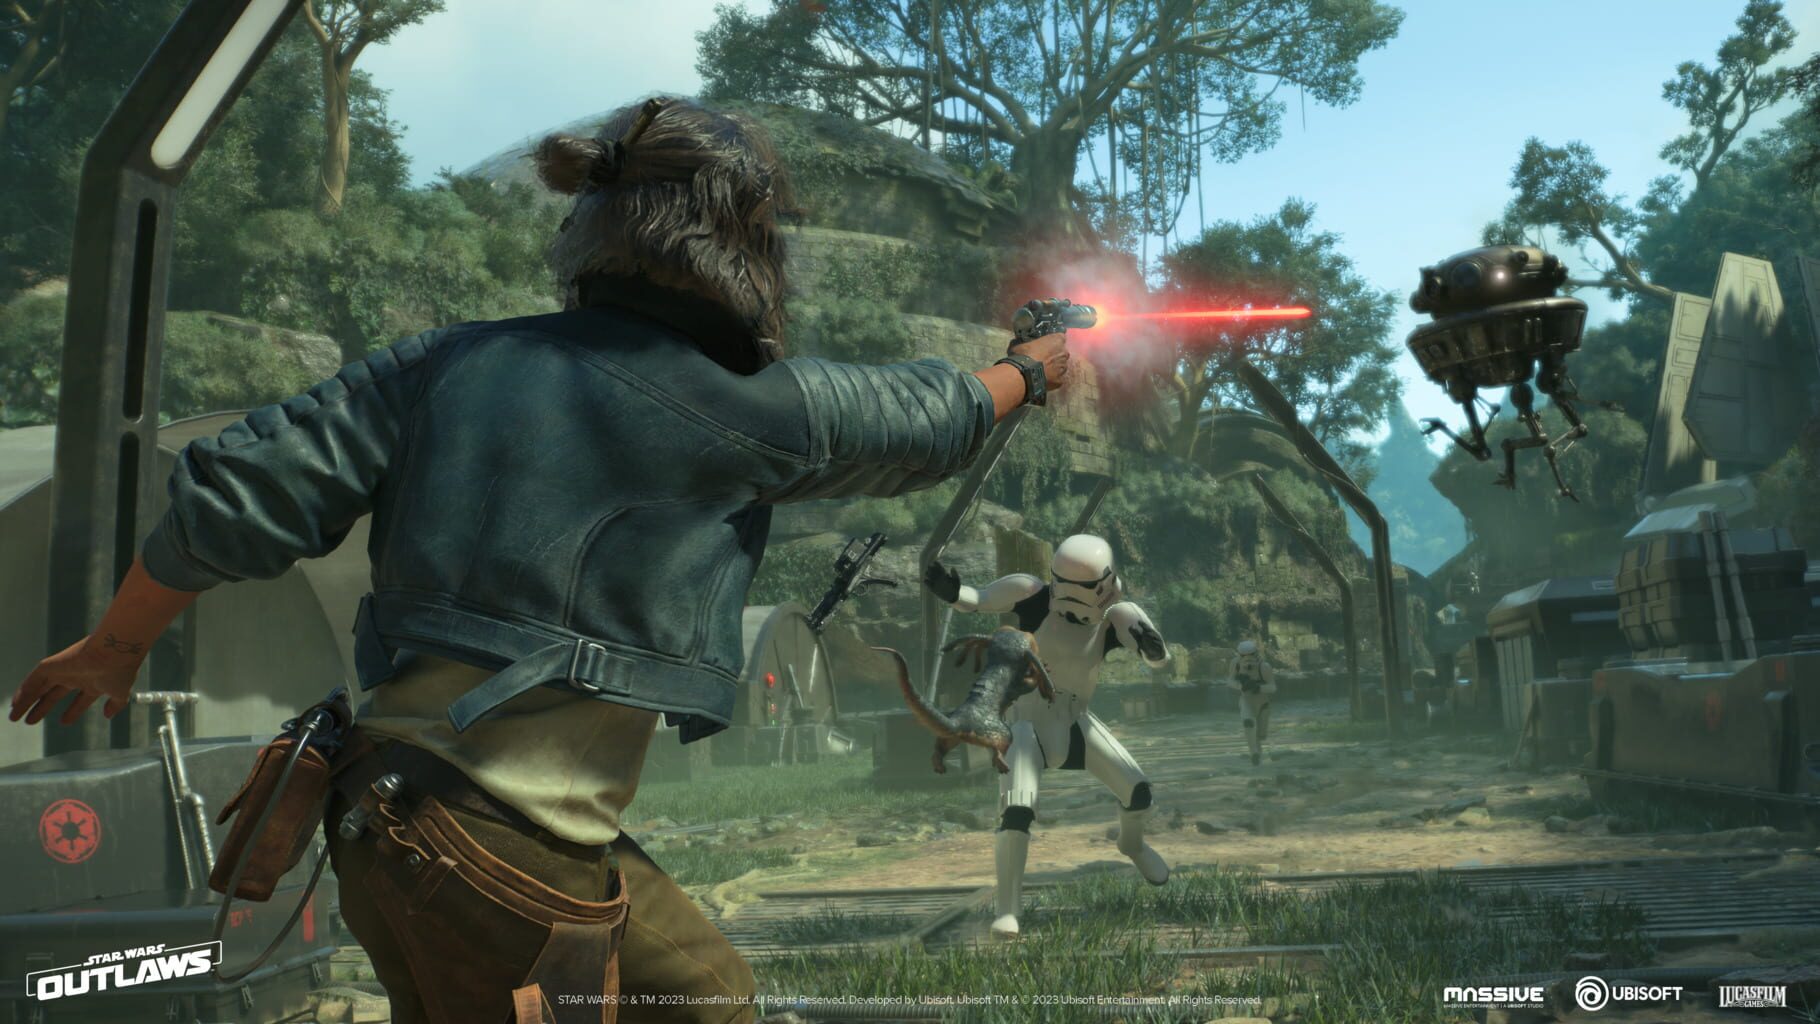 Screenshot for Star Wars Outlaws: Limited Edition